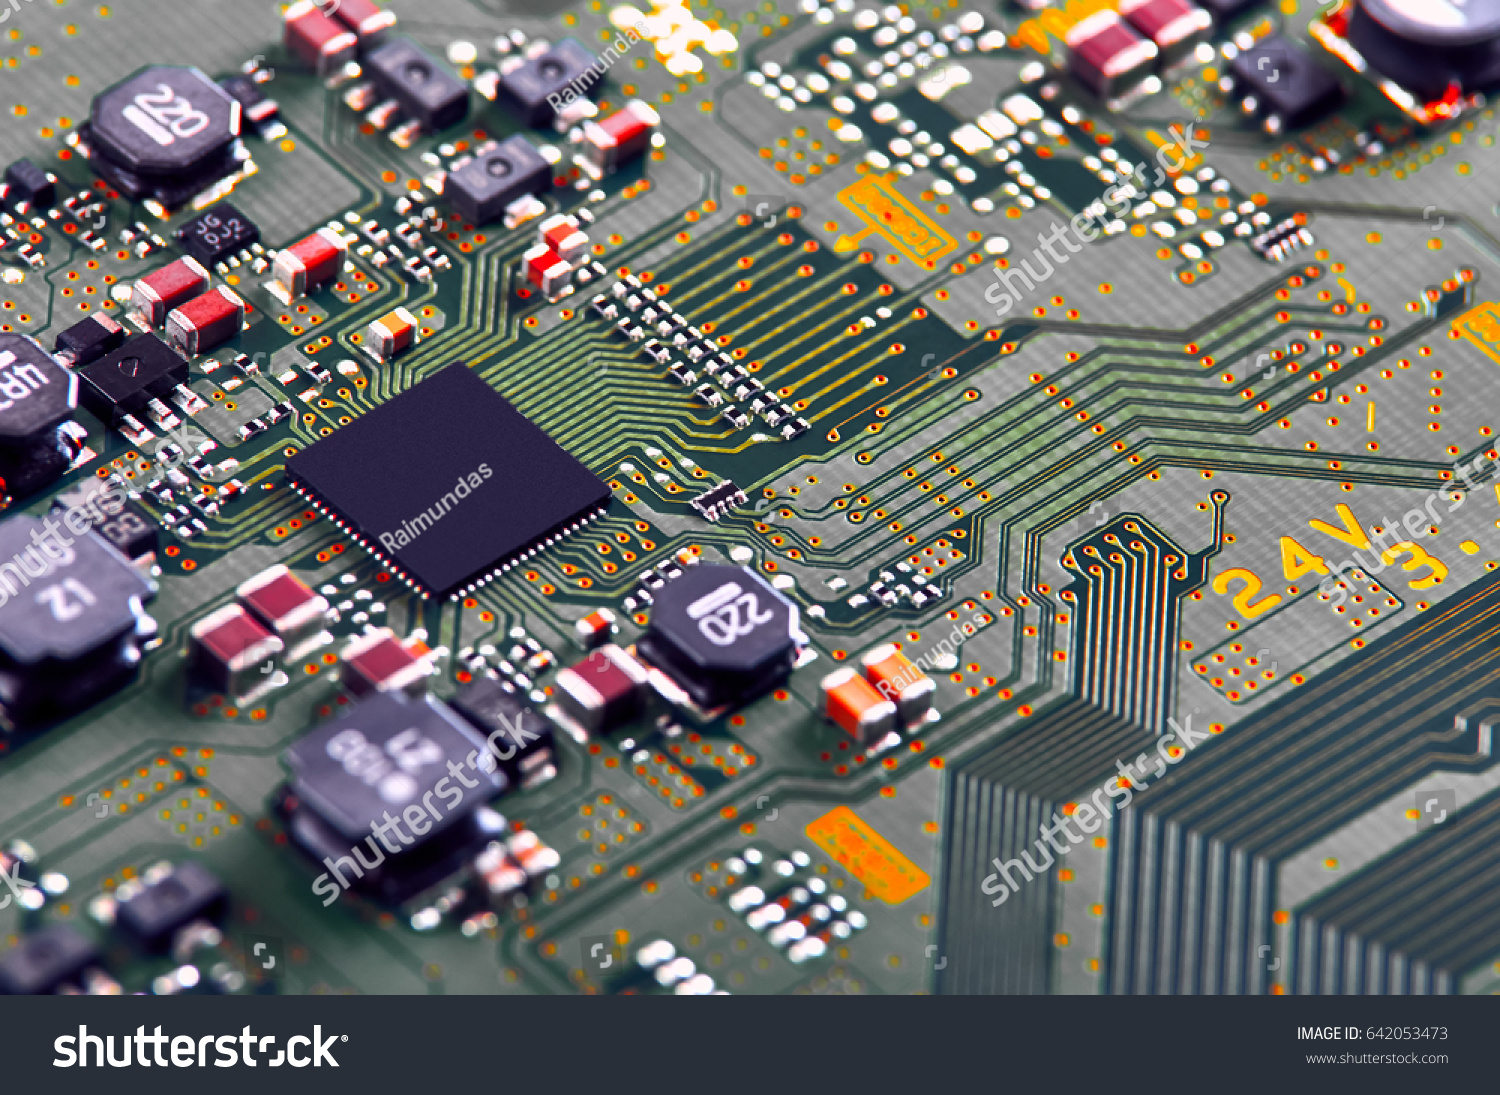 Electronic circuit board close up. #642053473